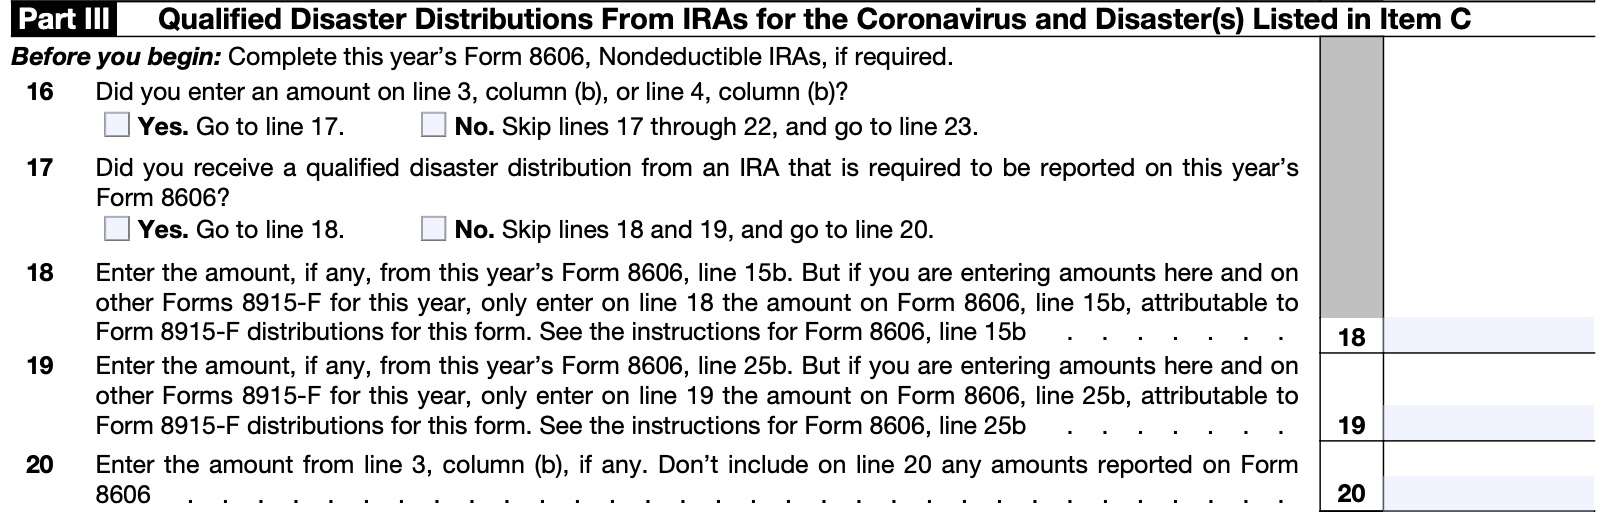 irs form 8915-f part iii: qualified disaster distributions from iras for the coronavirus and disasters listed in item c